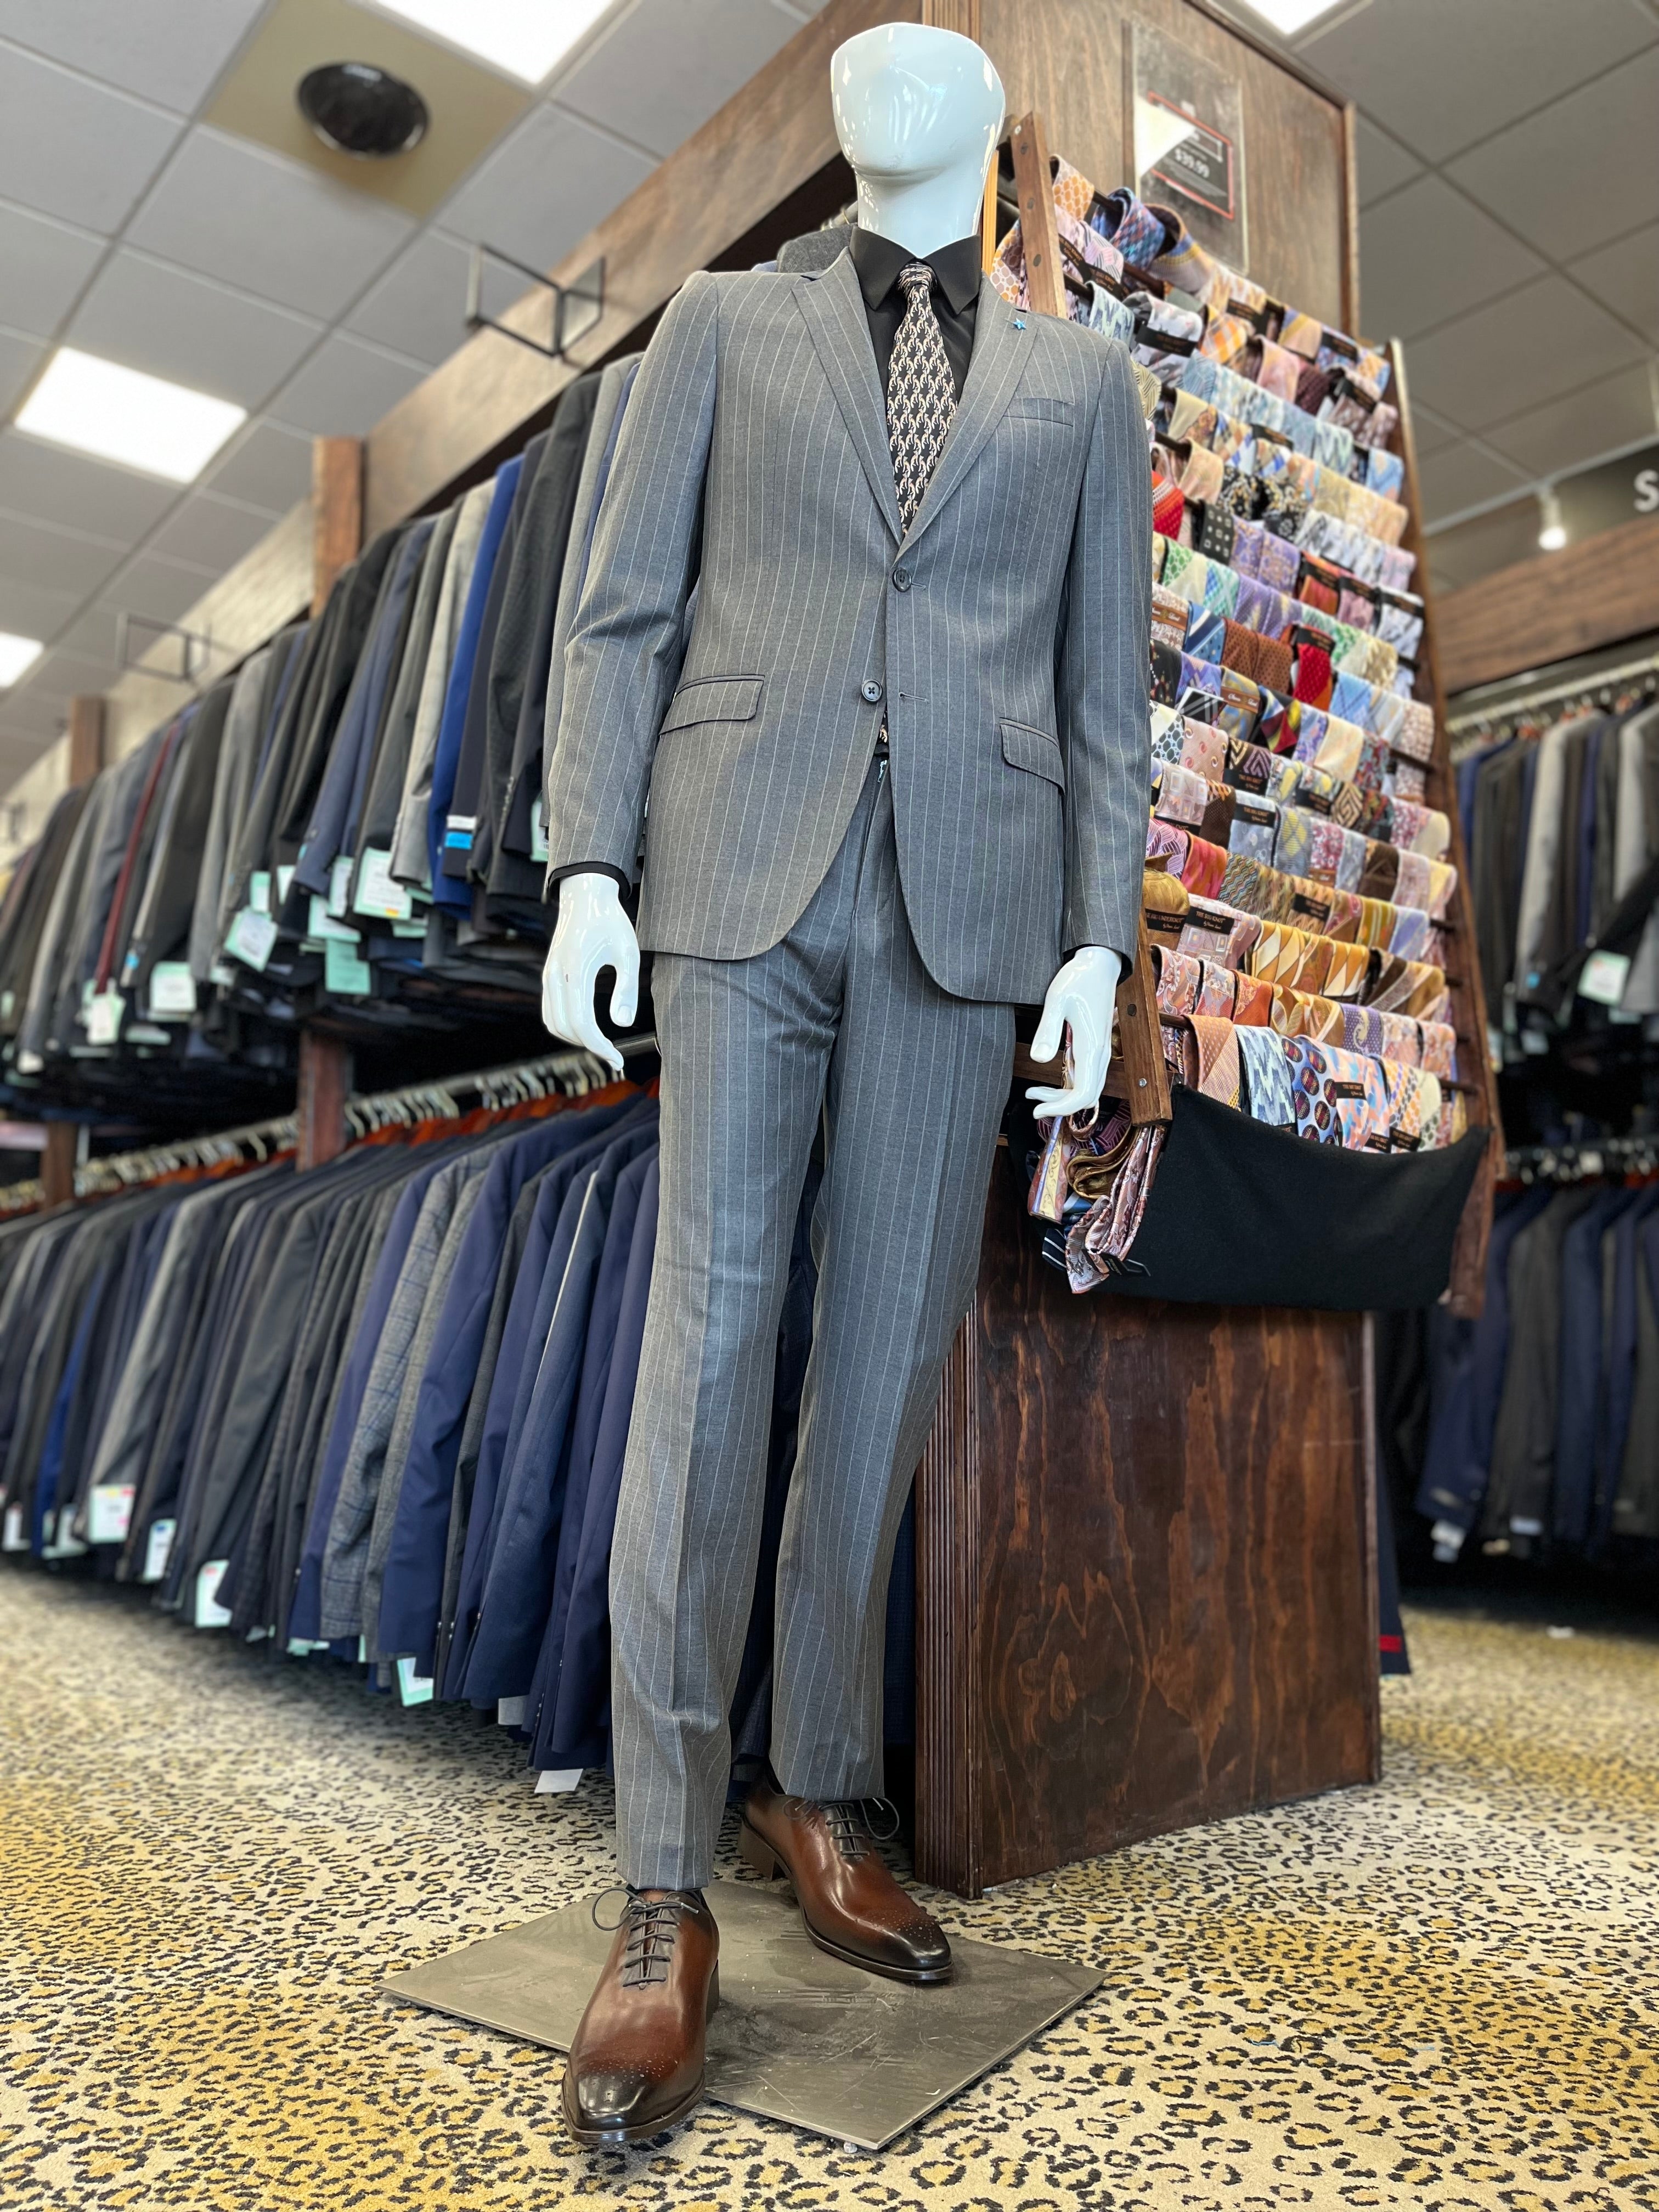 I’m not thin. Can I still wear a slim fit suit?